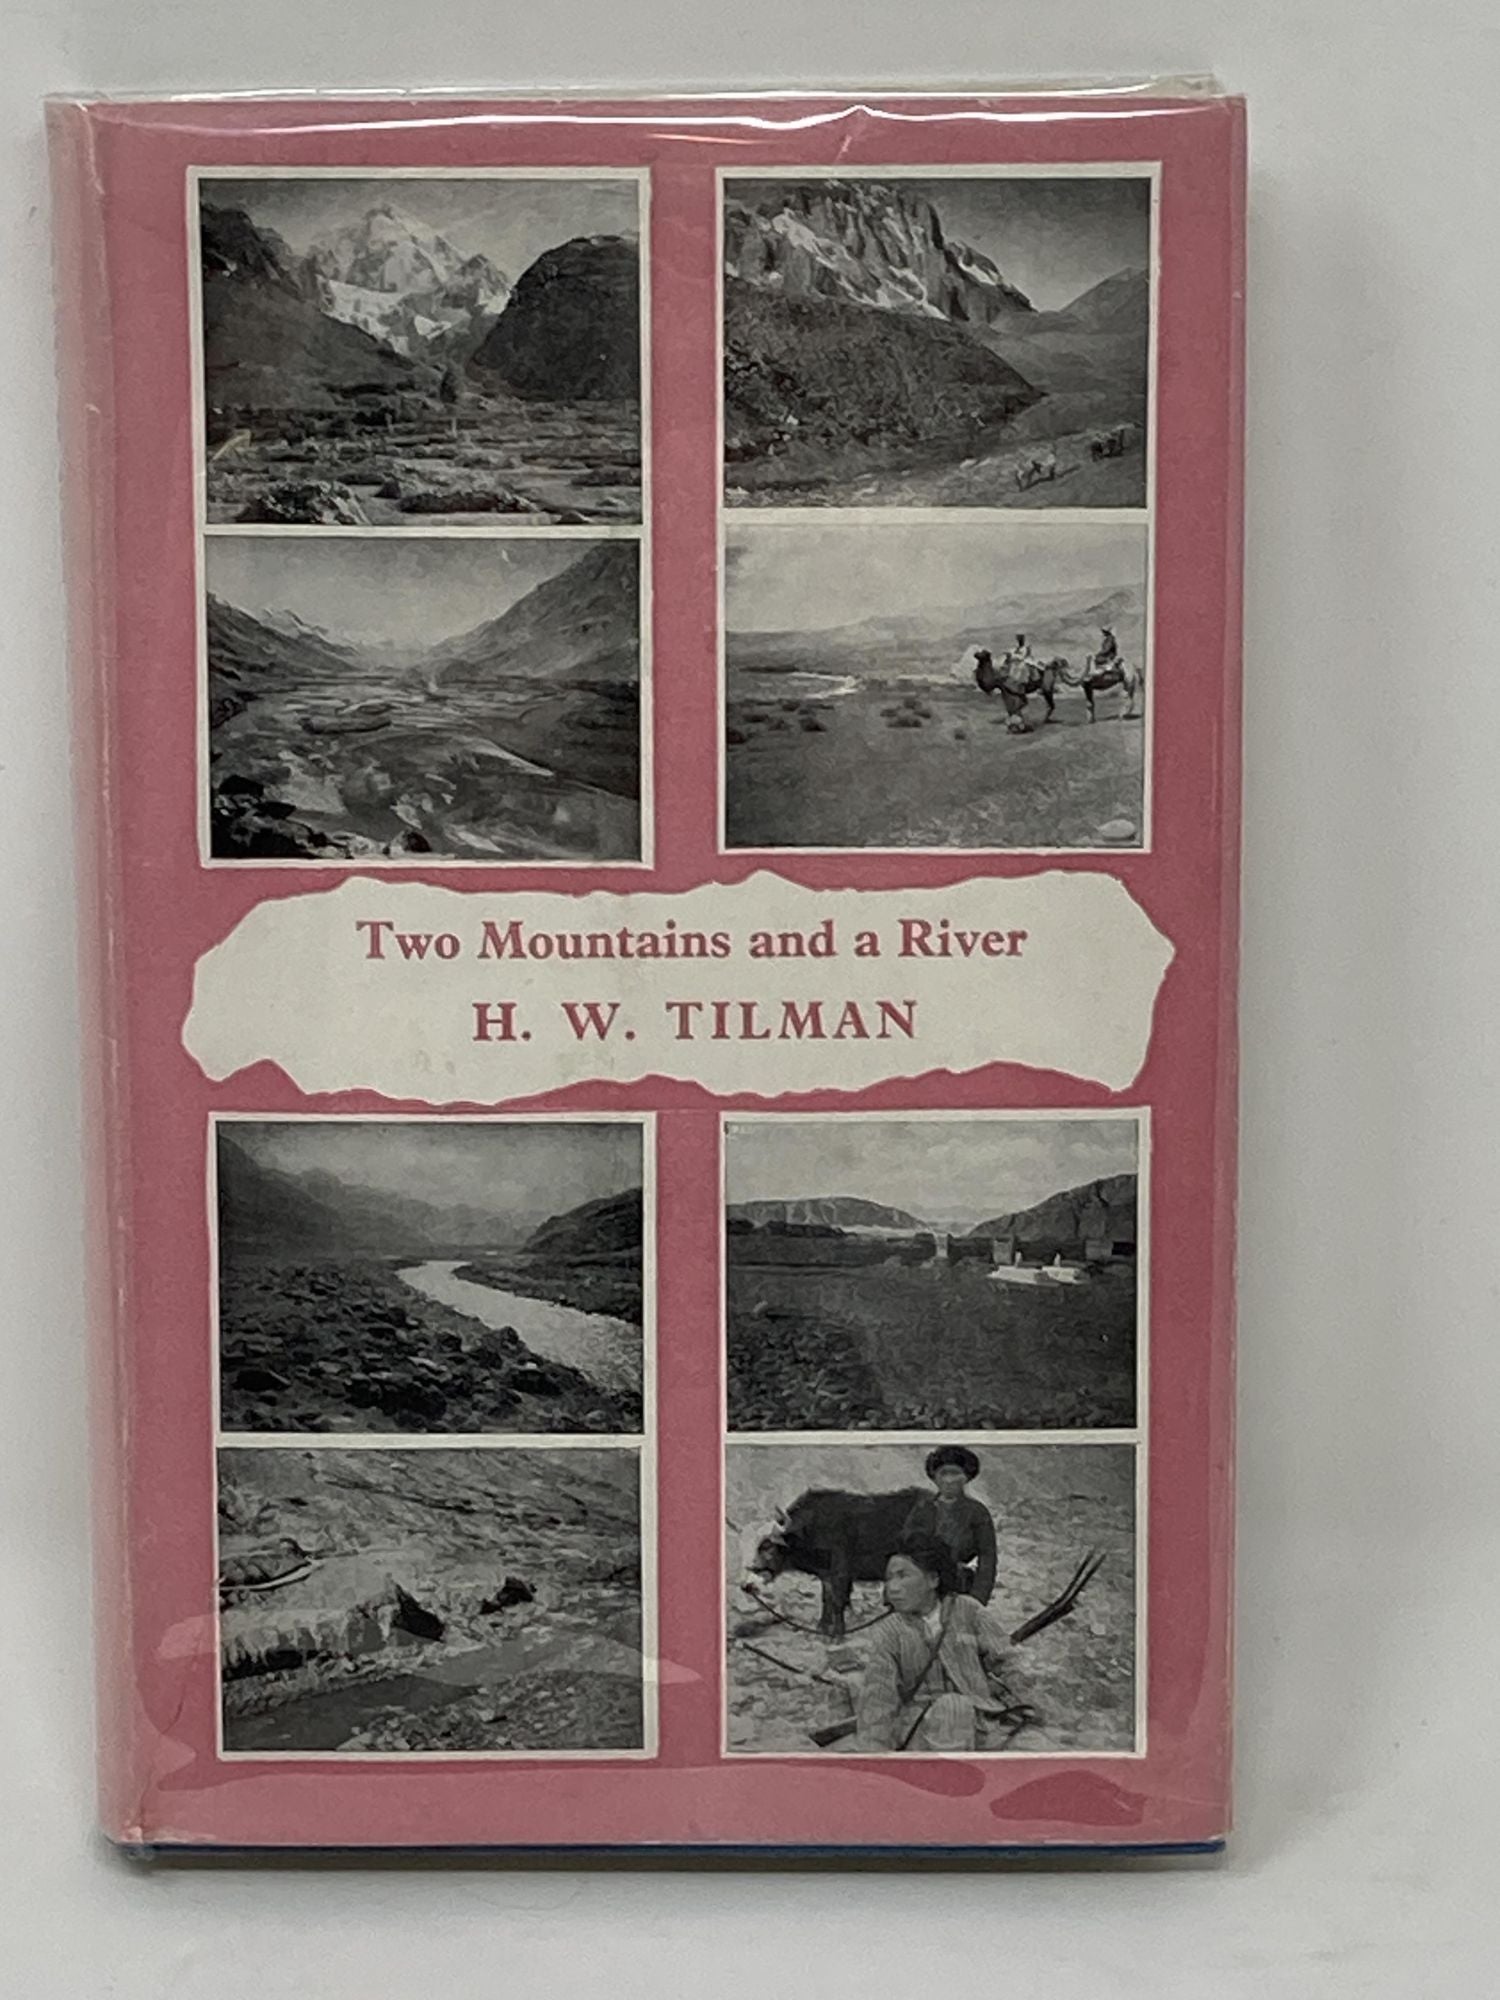 Tilman, H.W. - Two Mountains and a River